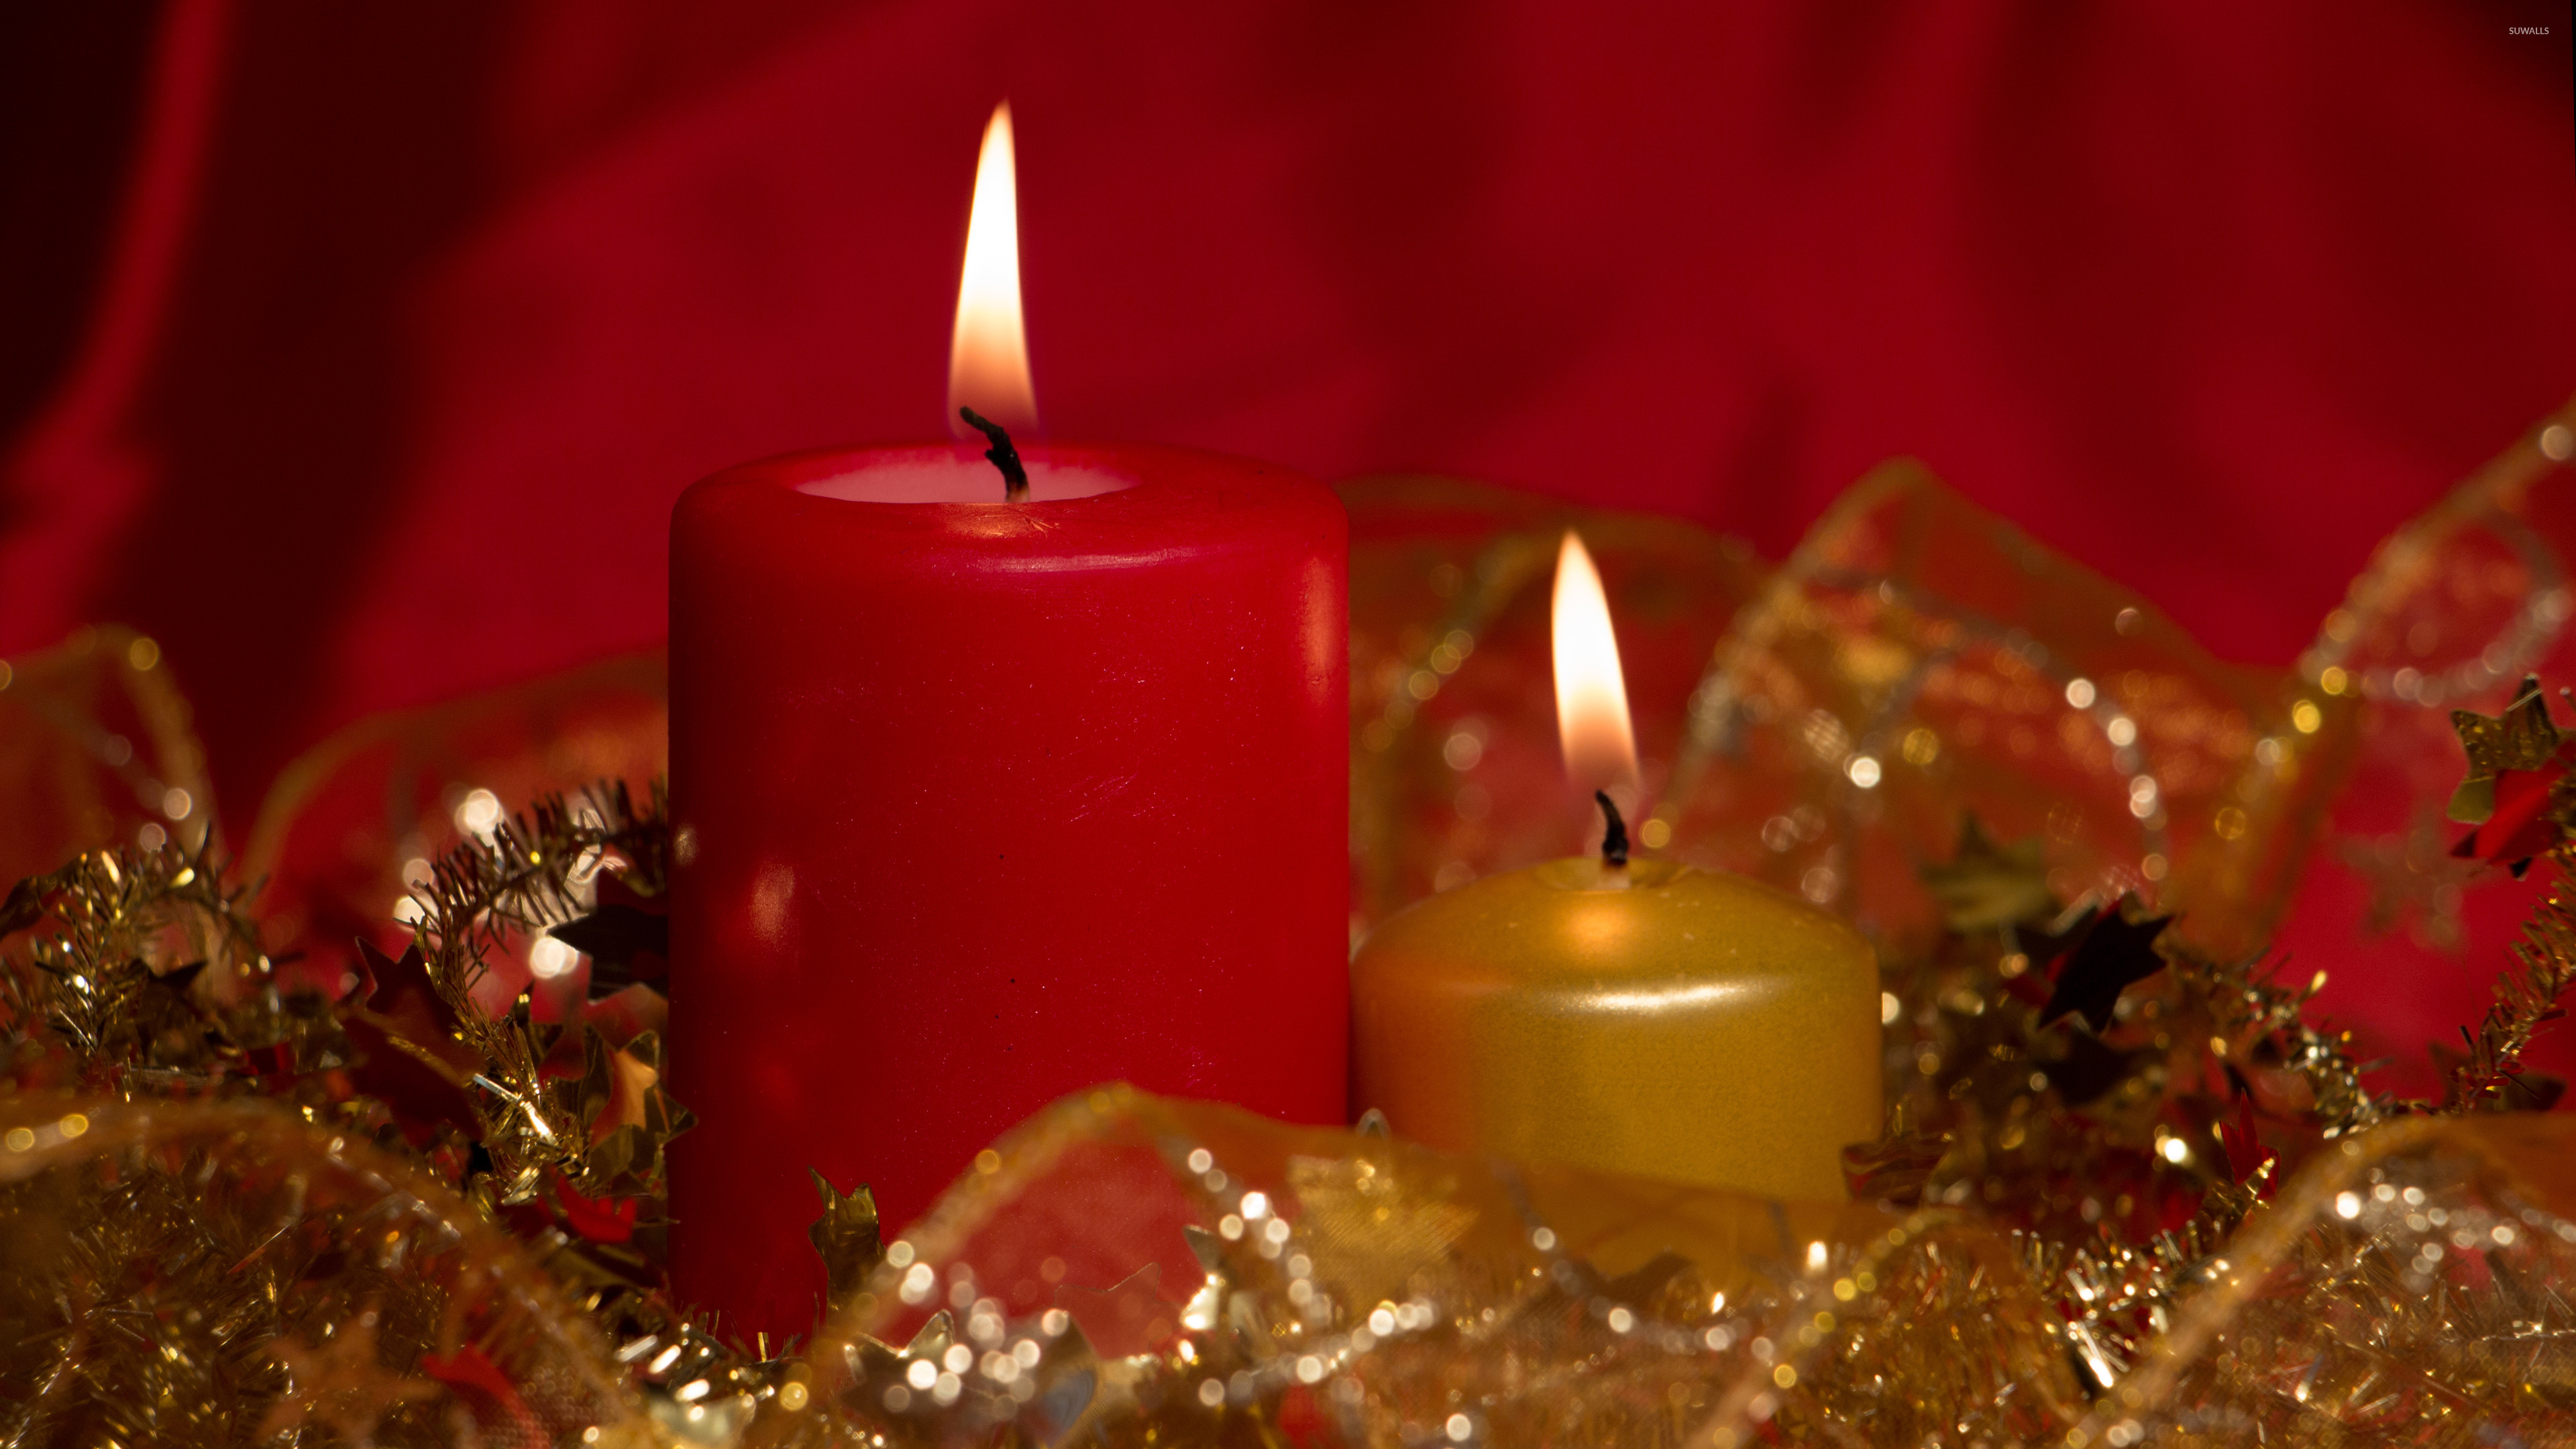 3840x2160 Red and golden Christmas candles wallpaper  jpg